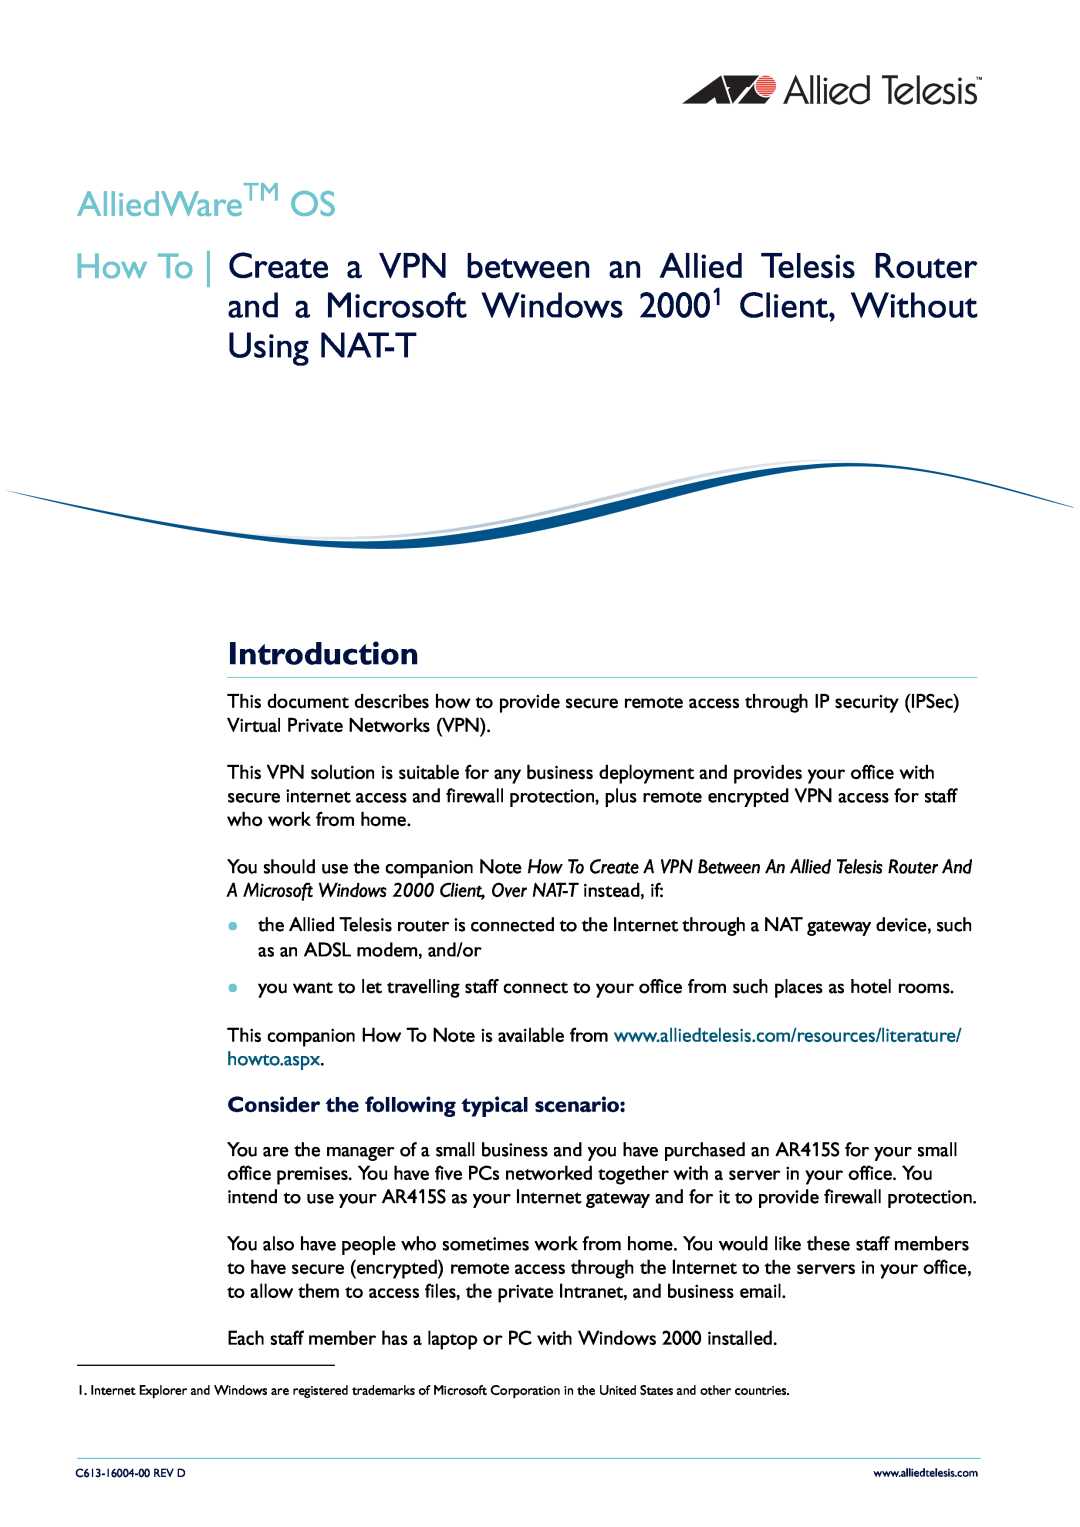 Allied Telesis VPN manual Introduction, AlliedWareTM OS, Consider the following typical scenario 